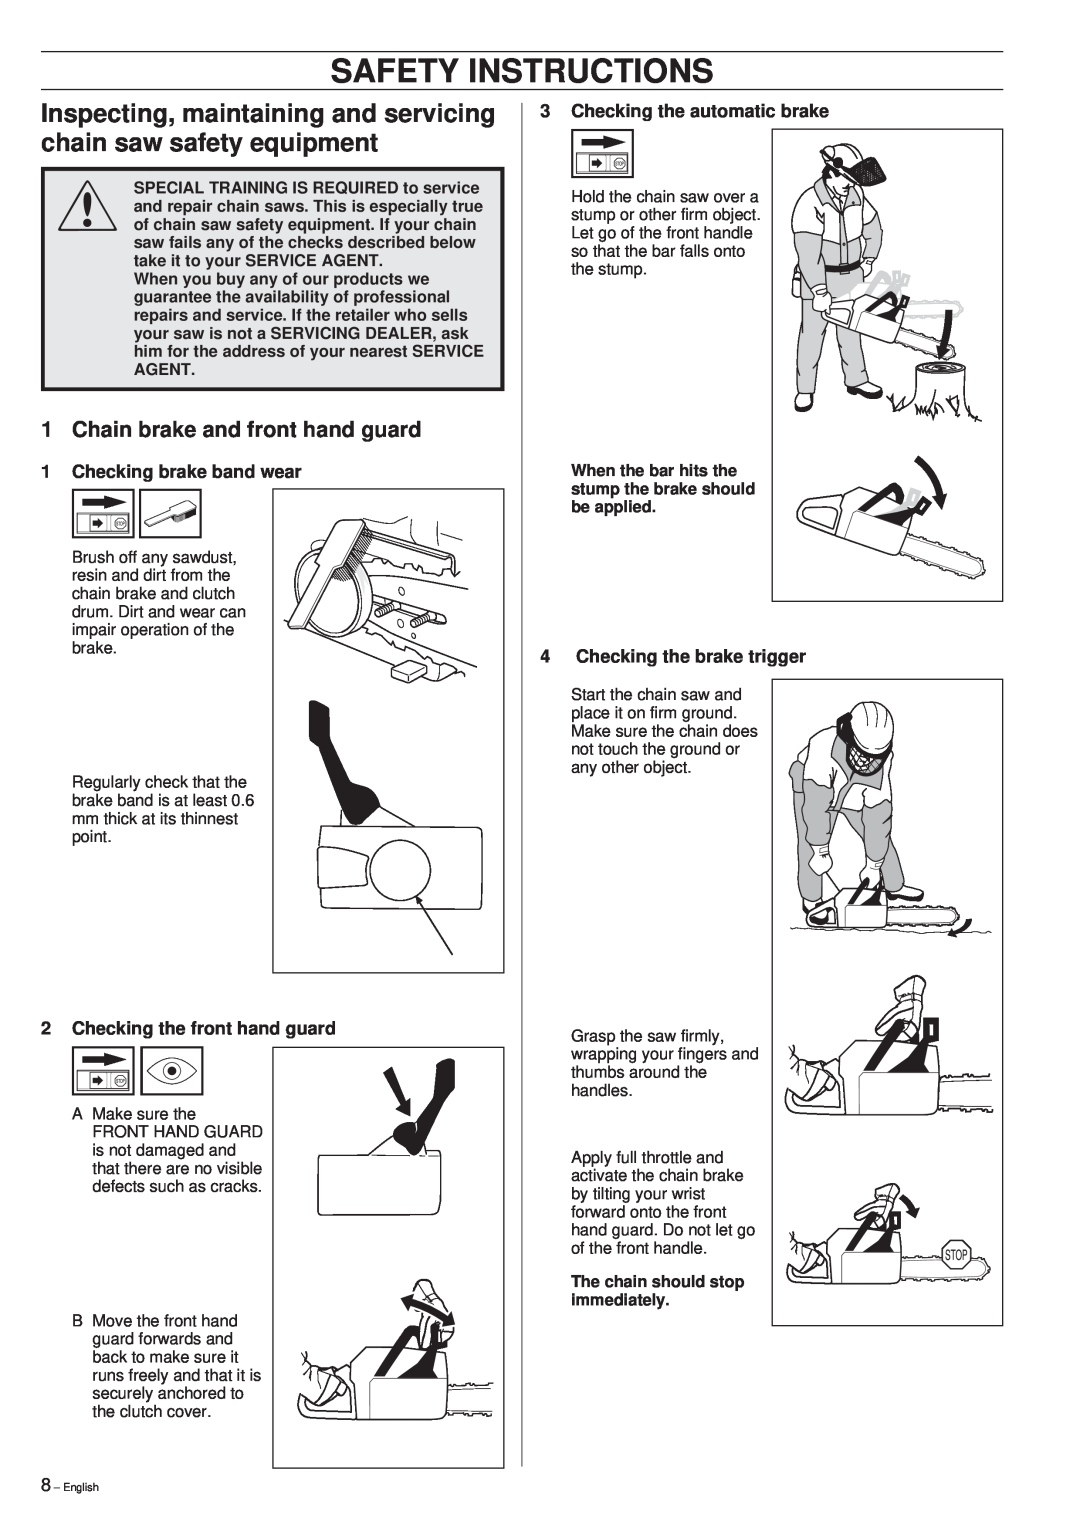 Husqvarna 288XP/XP lite manual Safety Instructions, Inspecting, maintaining and servicing chain saw safety equipment 